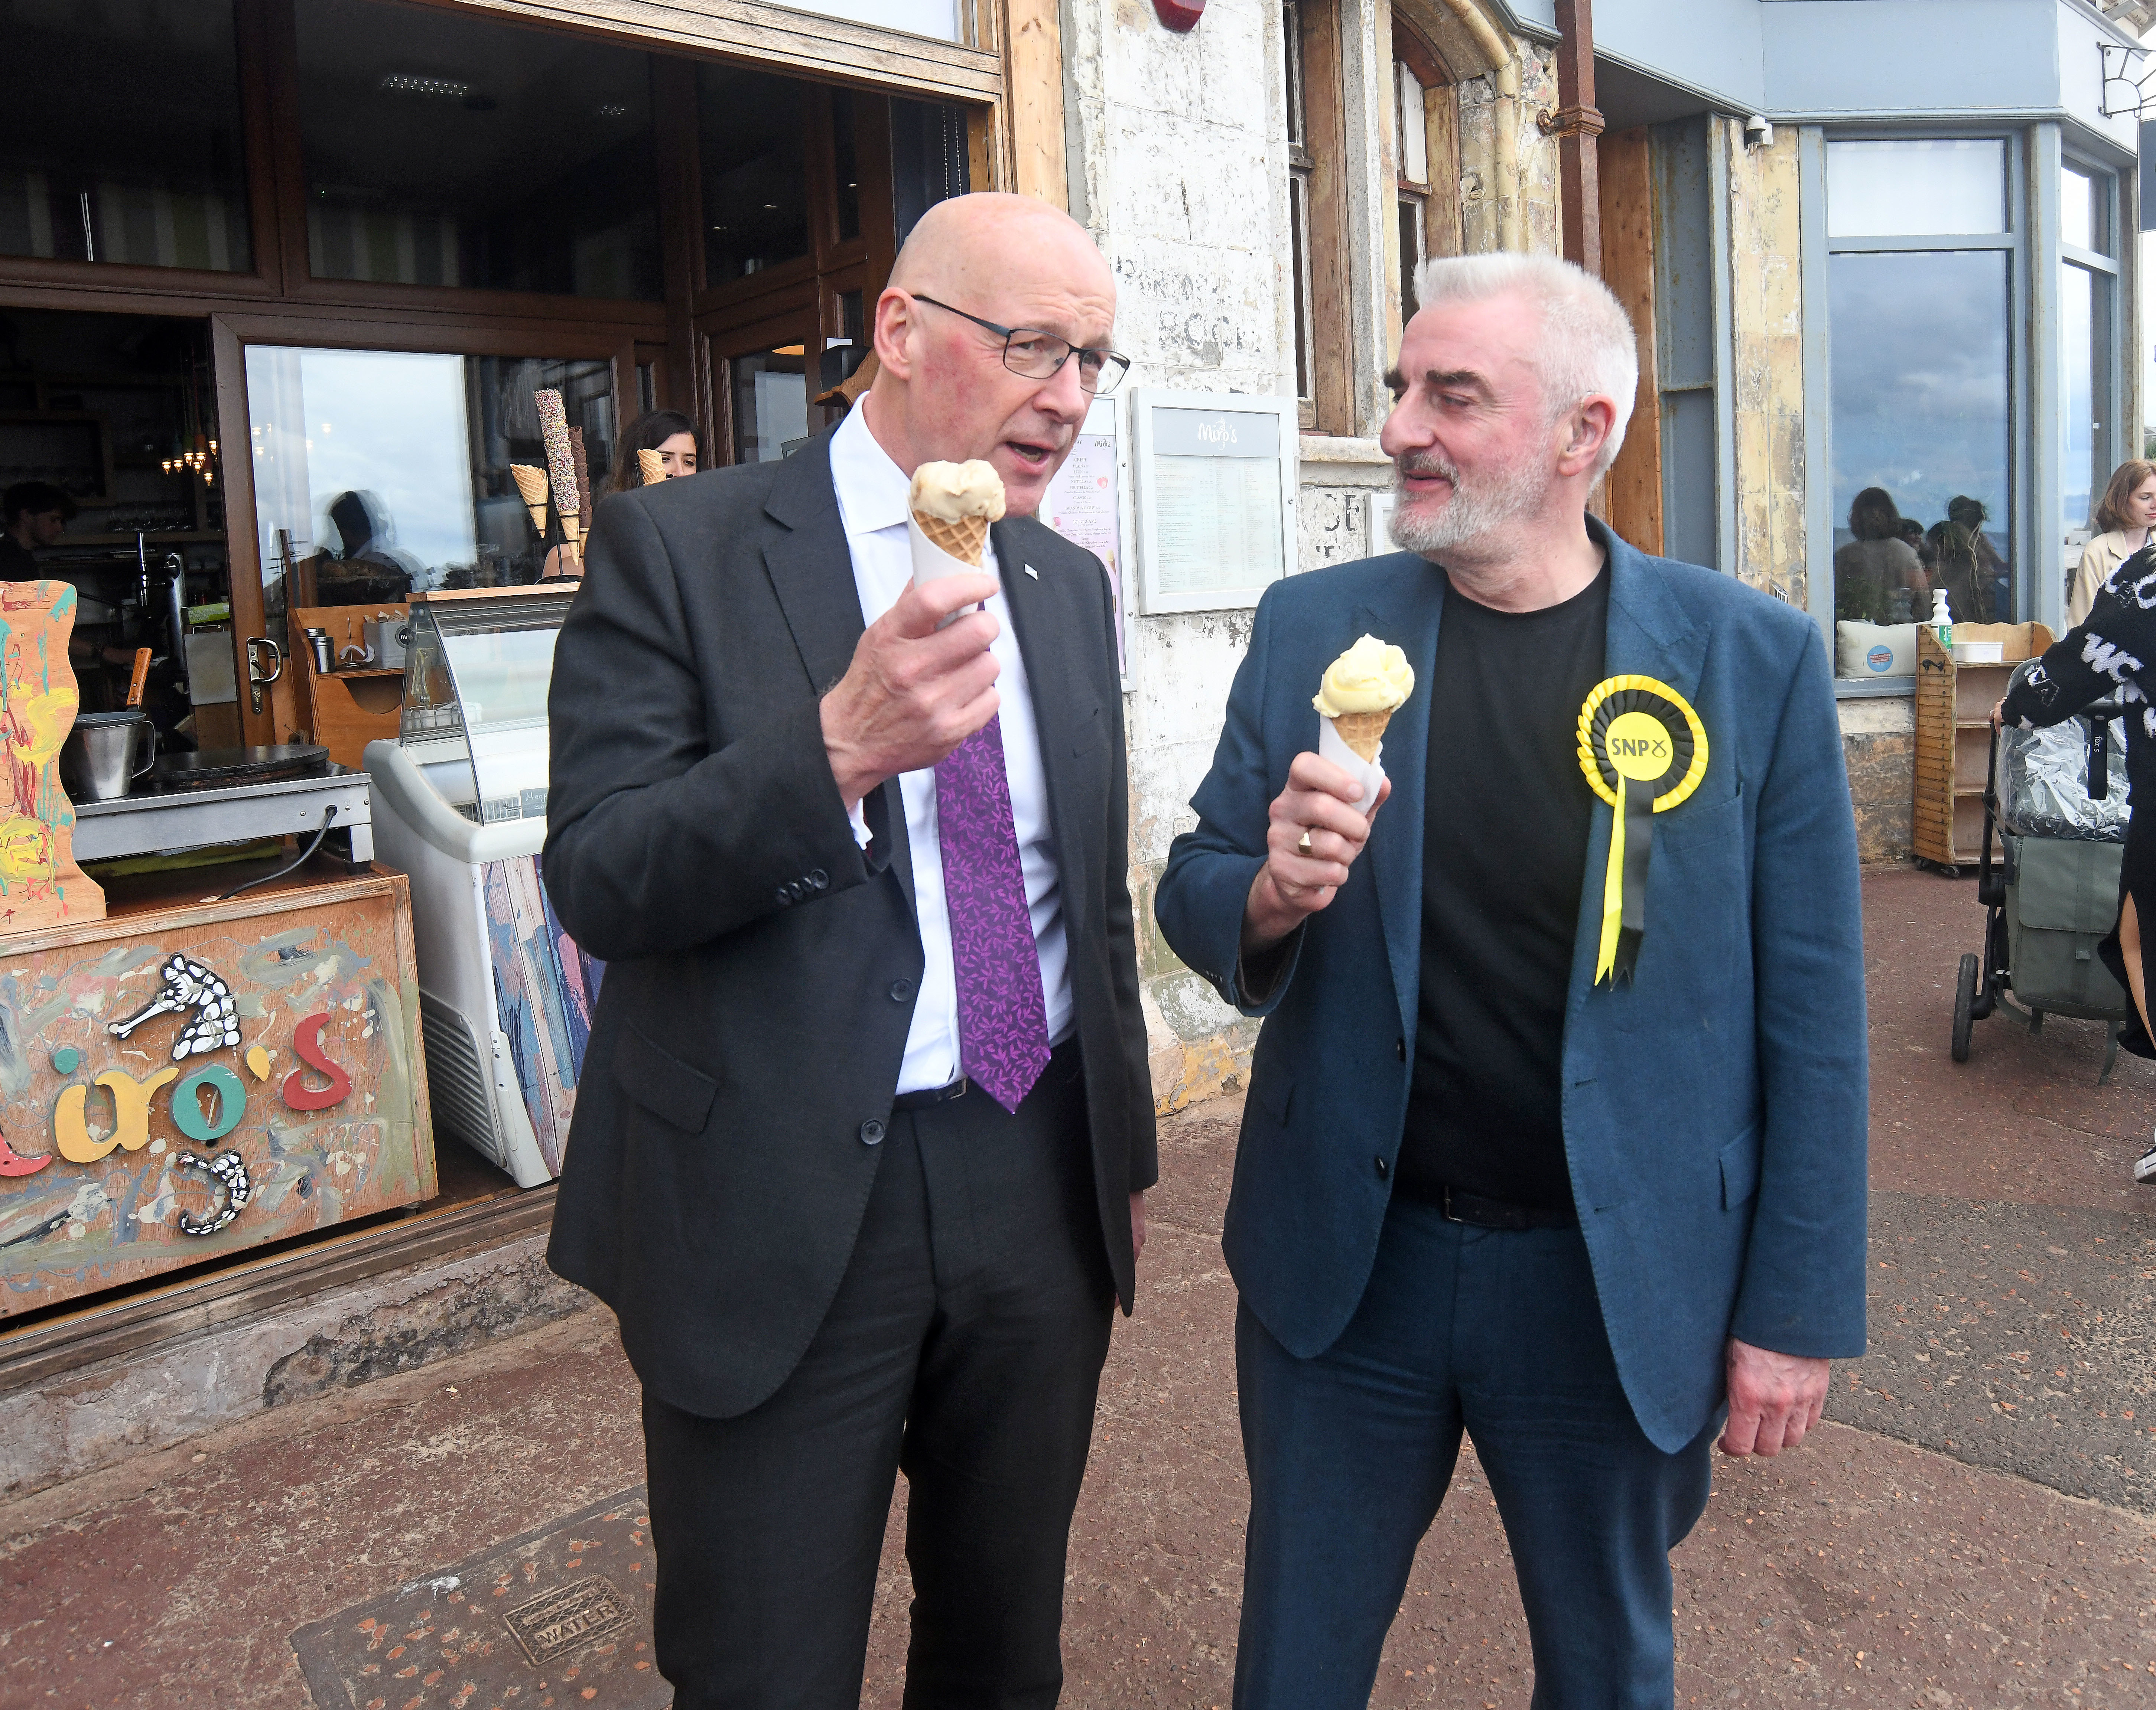 First Minister John Swinney and Edinburgh East and Musselburgh candidate Tommy Sheppard enjoy eating ice-cream cones while campaigning in Portobello